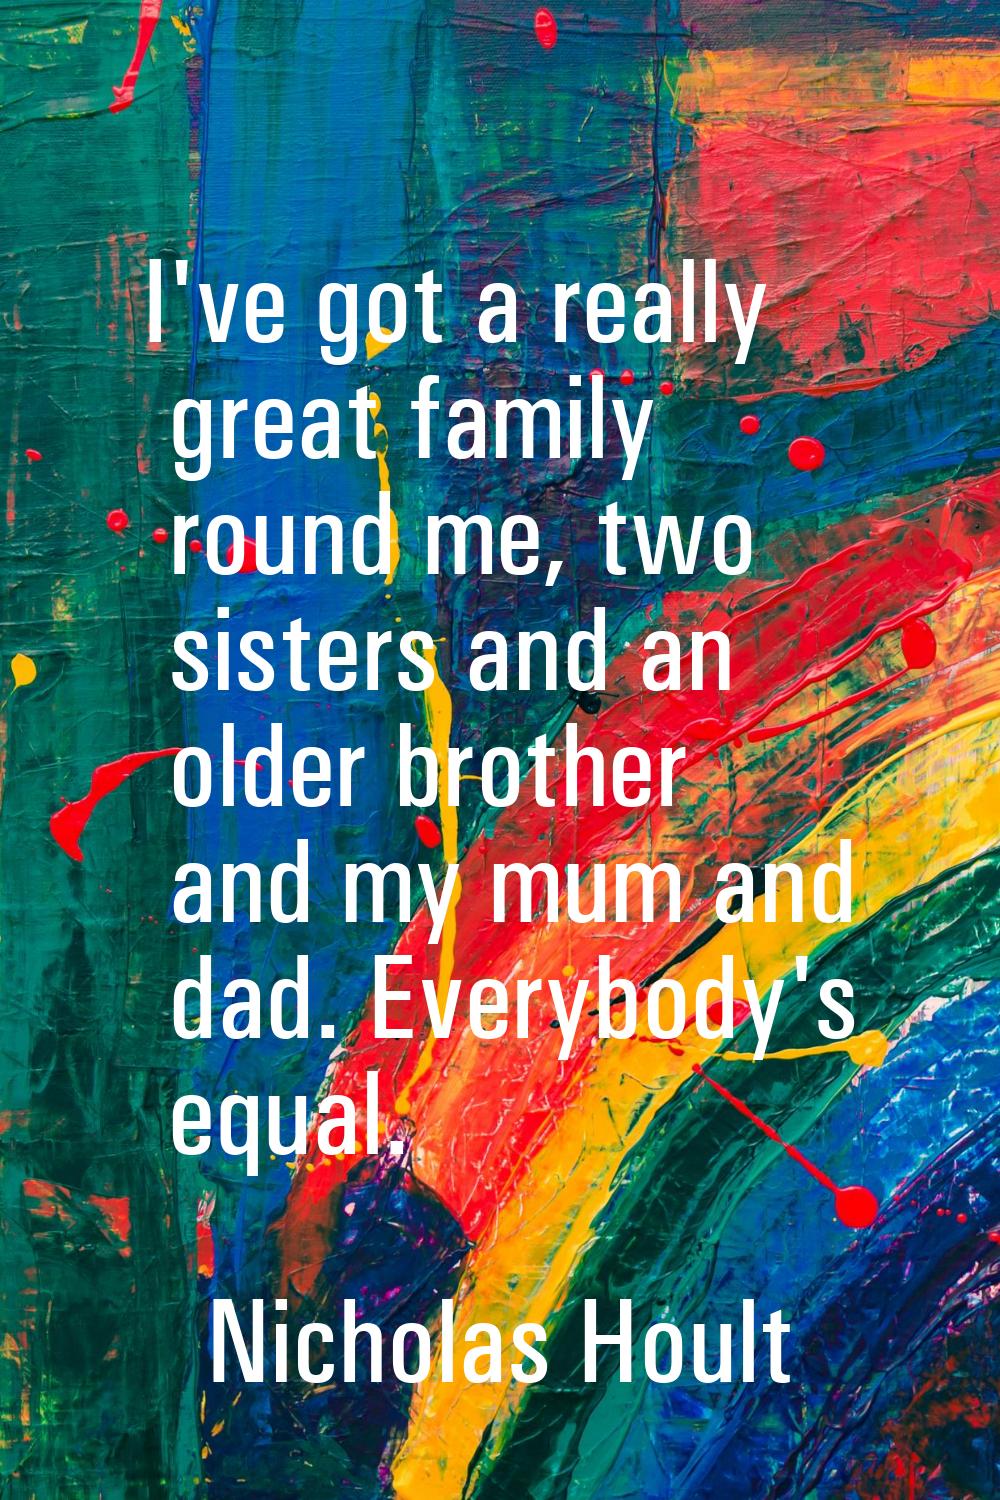 I've got a really great family round me, two sisters and an older brother and my mum and dad. Every